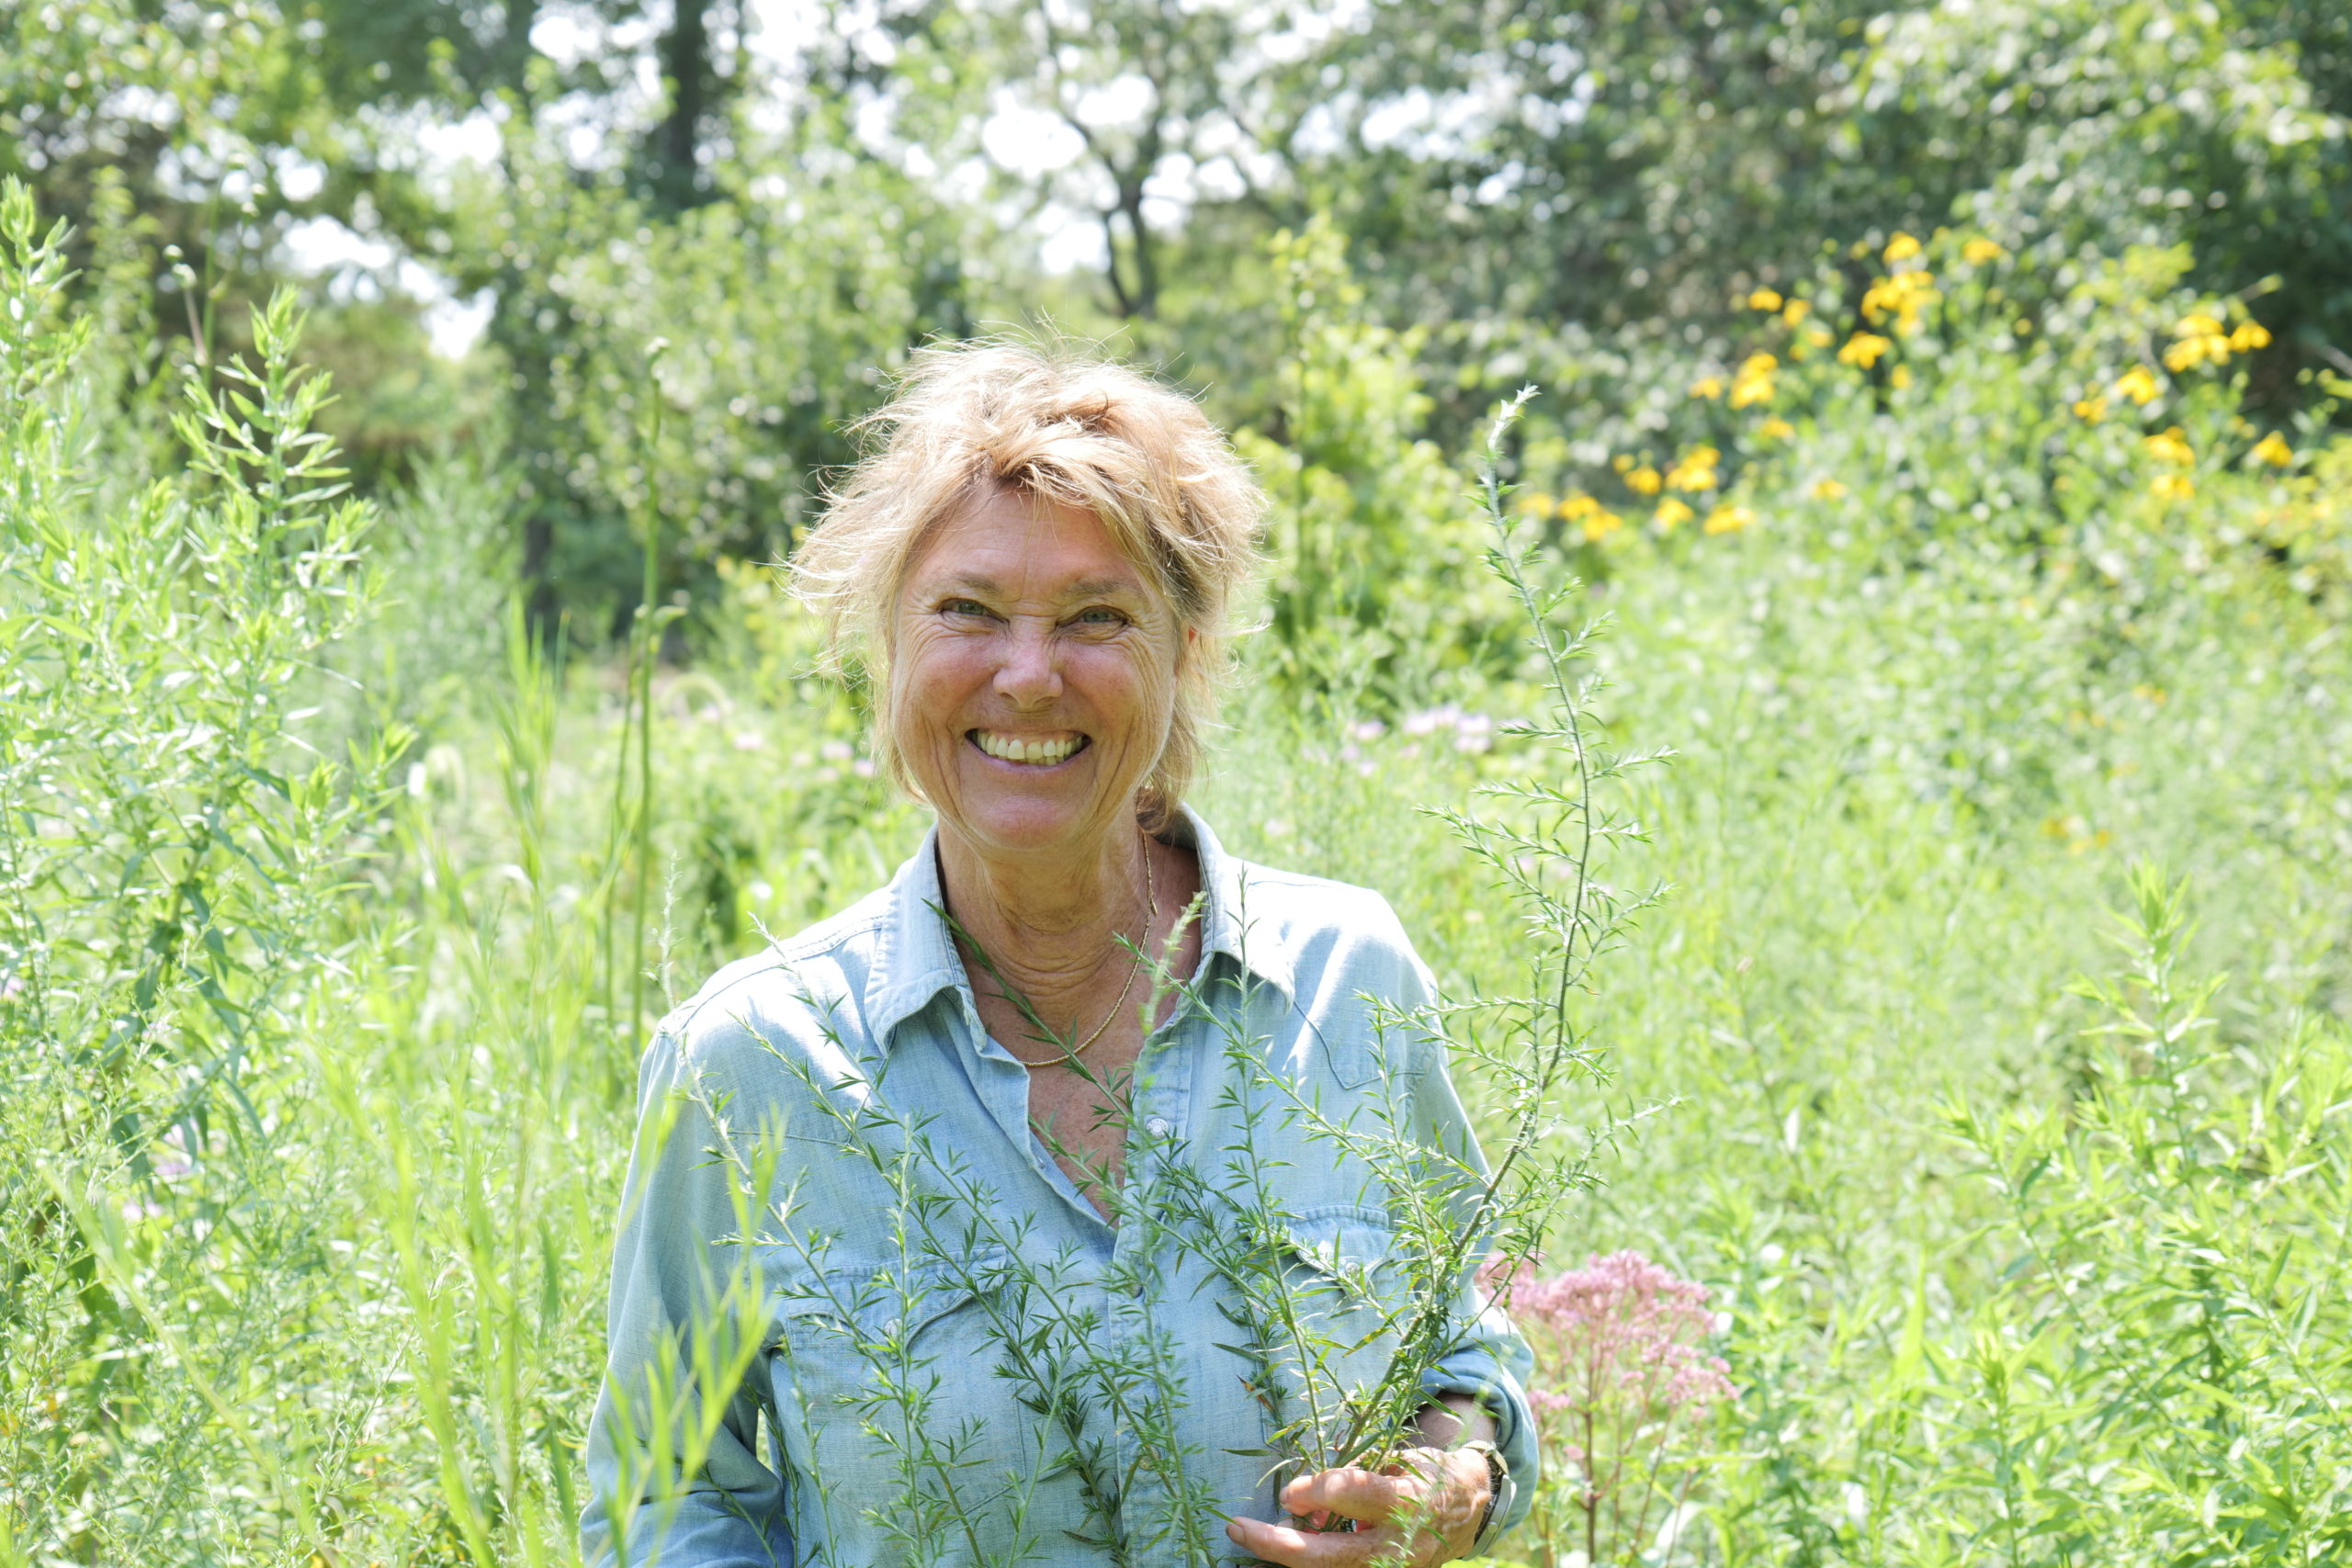 Edwina von Gal, of the Perfect Earth Project, in her garden.